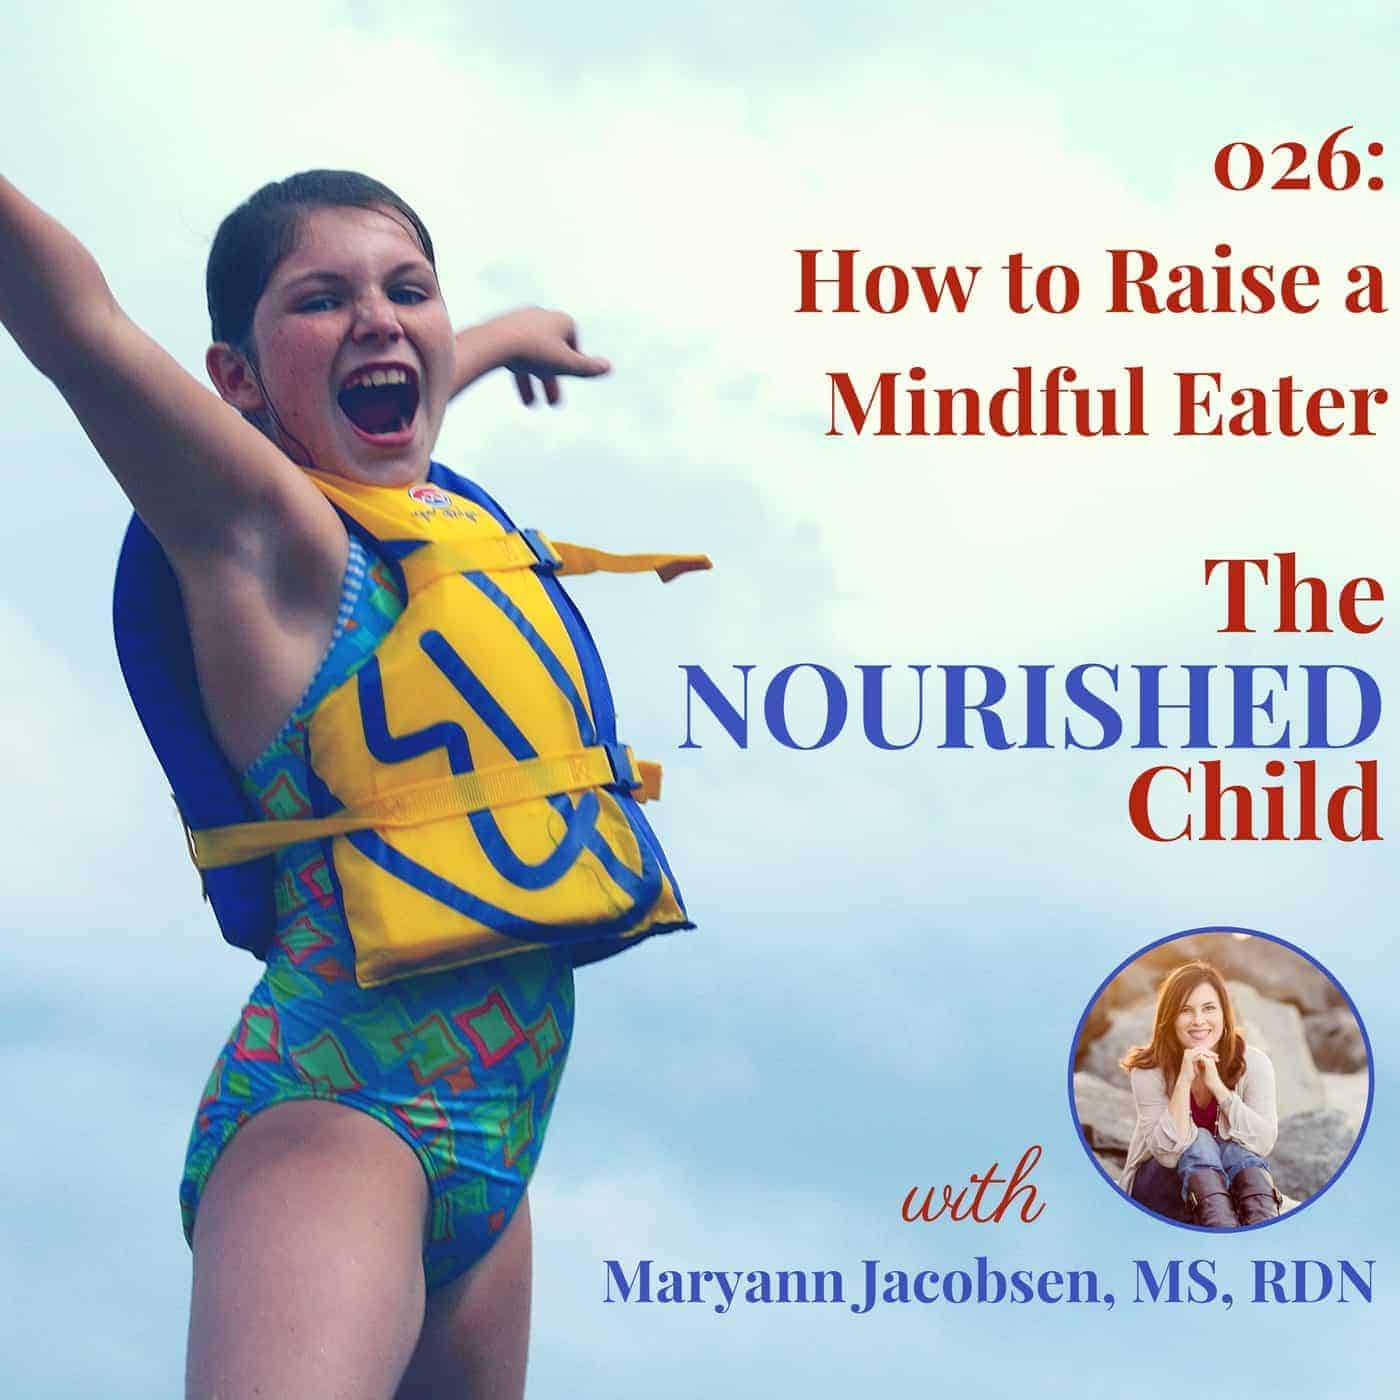 The Nourished Child podcast #26: How to Raise a Mindful Eater